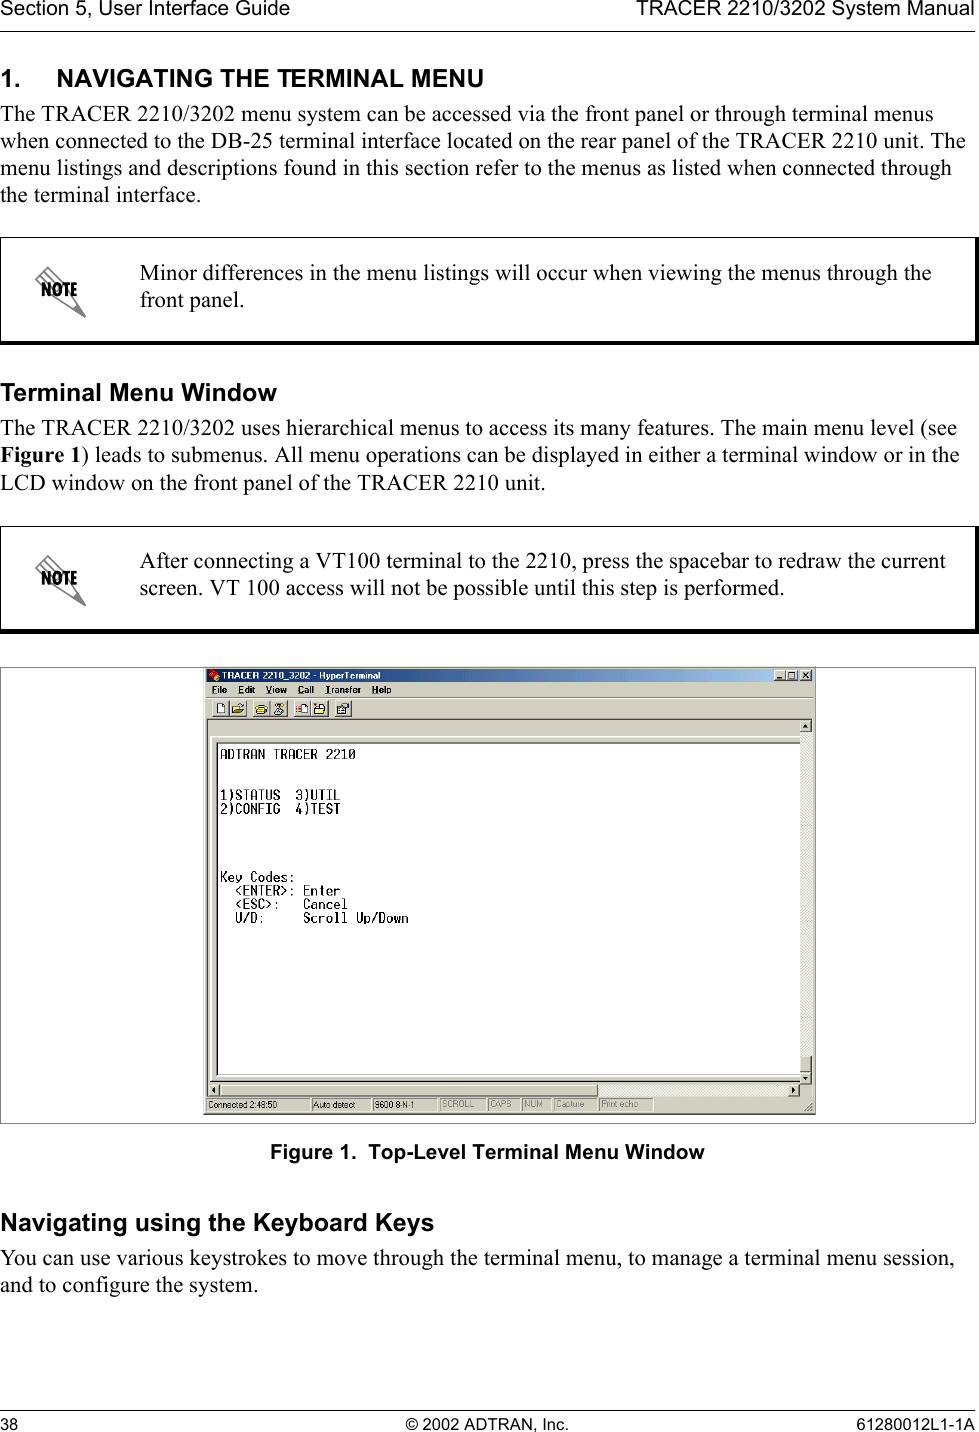 Section 5, User Interface Guide TRACER 2210/3202 System Manual38 © 2002 ADTRAN, Inc. 61280012L1-1A1. NAVIGATING THE TERMINAL MENUThe TRACER 2210/3202 menu system can be accessed via the front panel or through terminal menus when connected to the DB-25 terminal interface located on the rear panel of the TRACER 2210 unit. The menu listings and descriptions found in this section refer to the menus as listed when connected through the terminal interface.Terminal Menu WindowThe TRACER 2210/3202 uses hierarchical menus to access its many features. The main menu level (see Figure 1) leads to submenus. All menu operations can be displayed in either a terminal window or in the LCD window on the front panel of the TRACER 2210 unit.Figure 1.  Top-Level Terminal Menu WindowNavigating using the Keyboard KeysYou can use various keystrokes to move through the terminal menu, to manage a terminal menu session, and to configure the system.Minor differences in the menu listings will occur when viewing the menus through the front panel.After connecting a VT100 terminal to the 2210, press the spacebar to redraw the current screen. VT 100 access will not be possible until this step is performed.